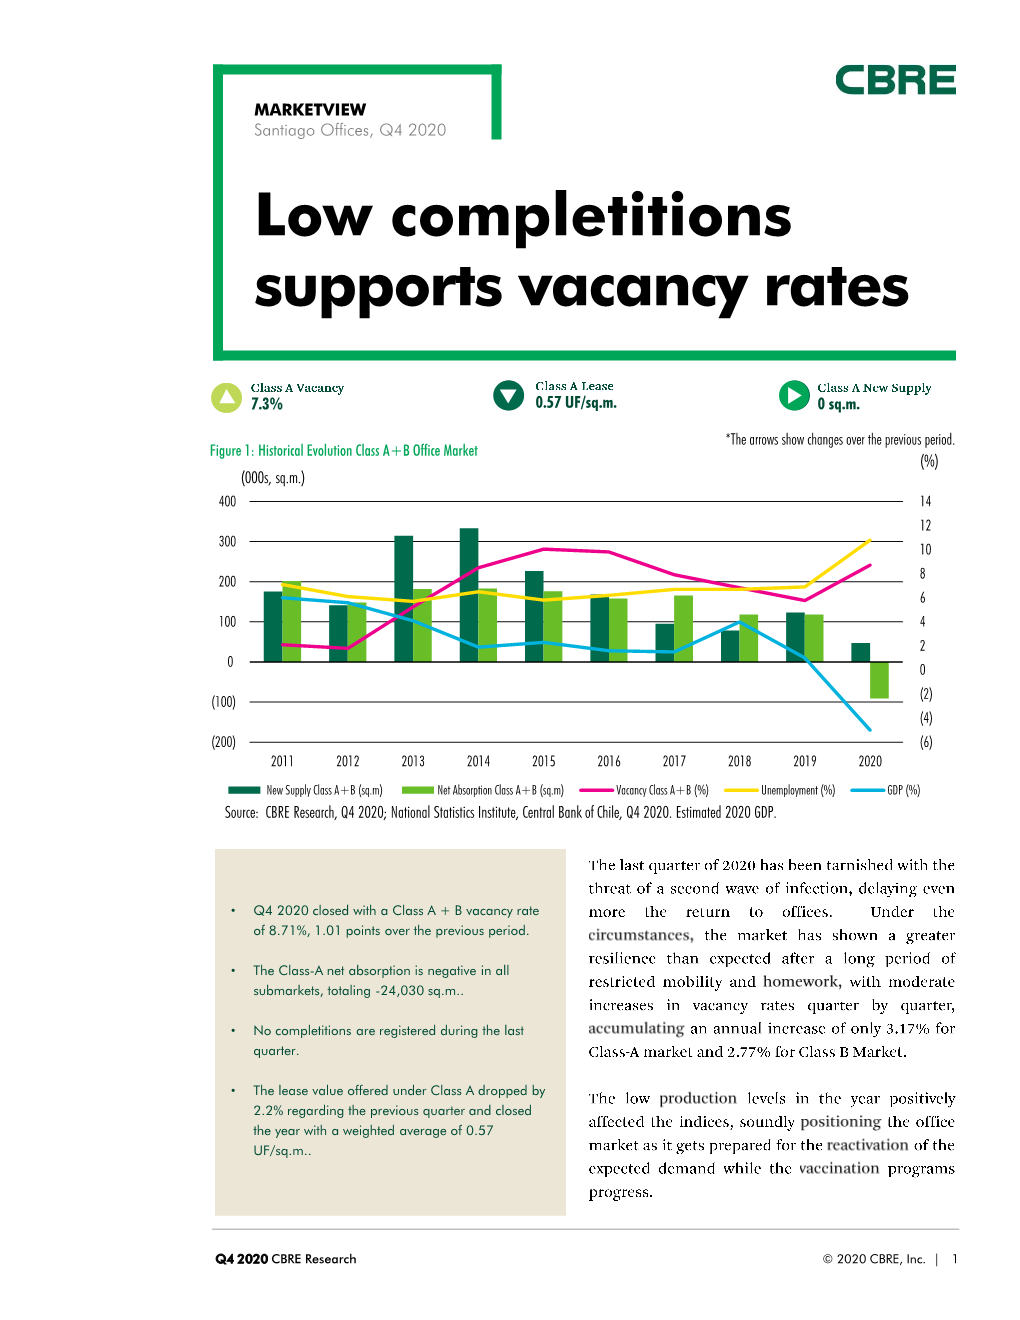 Low Completitions Supports Vacancy Rates